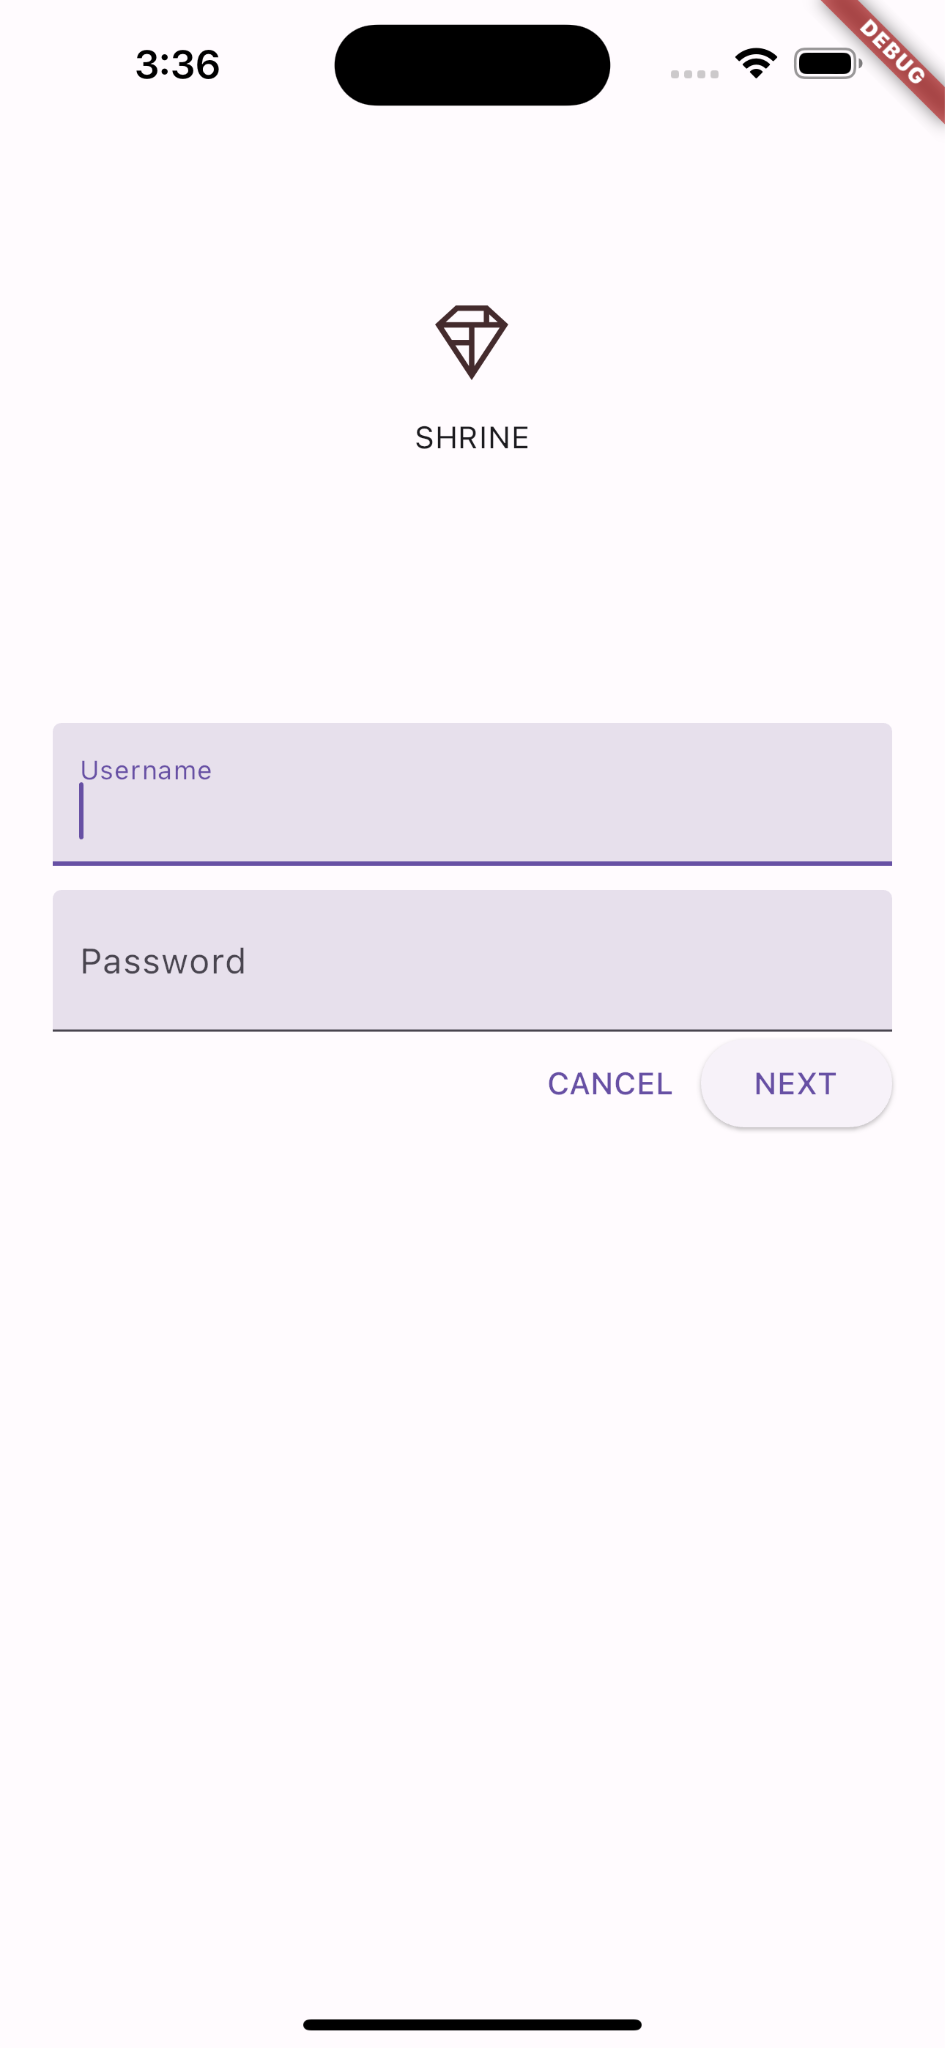 Shrine logo with username and password fields, cancel and next buttons